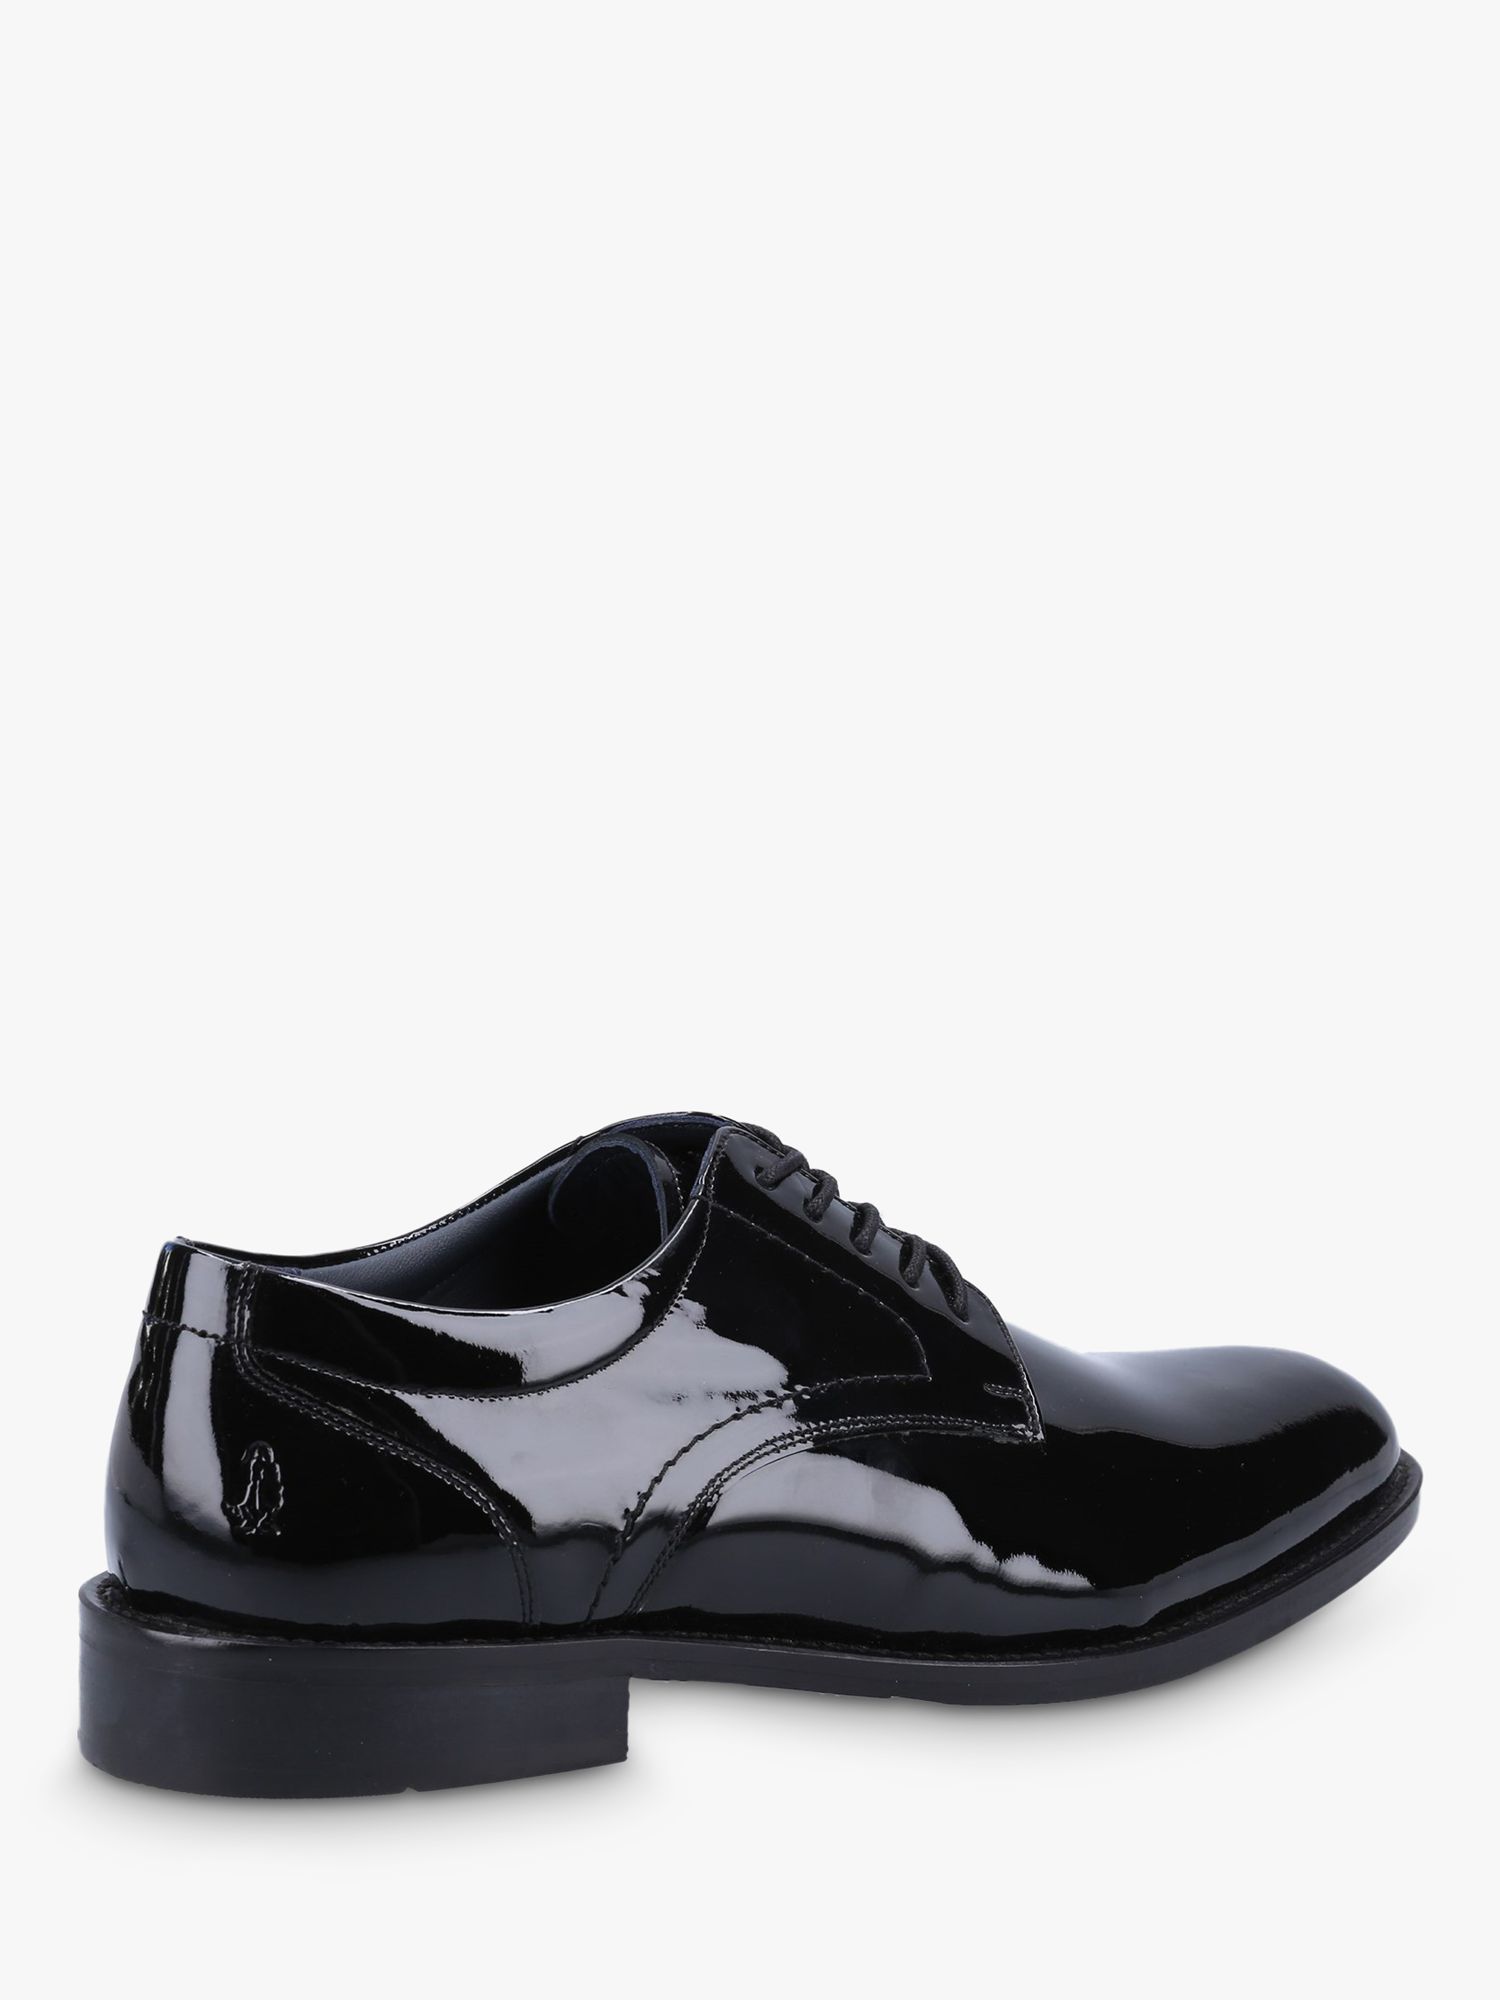 Hush Puppies Damien Patent Leather Lace Up Brogues, Black at John Lewis ...